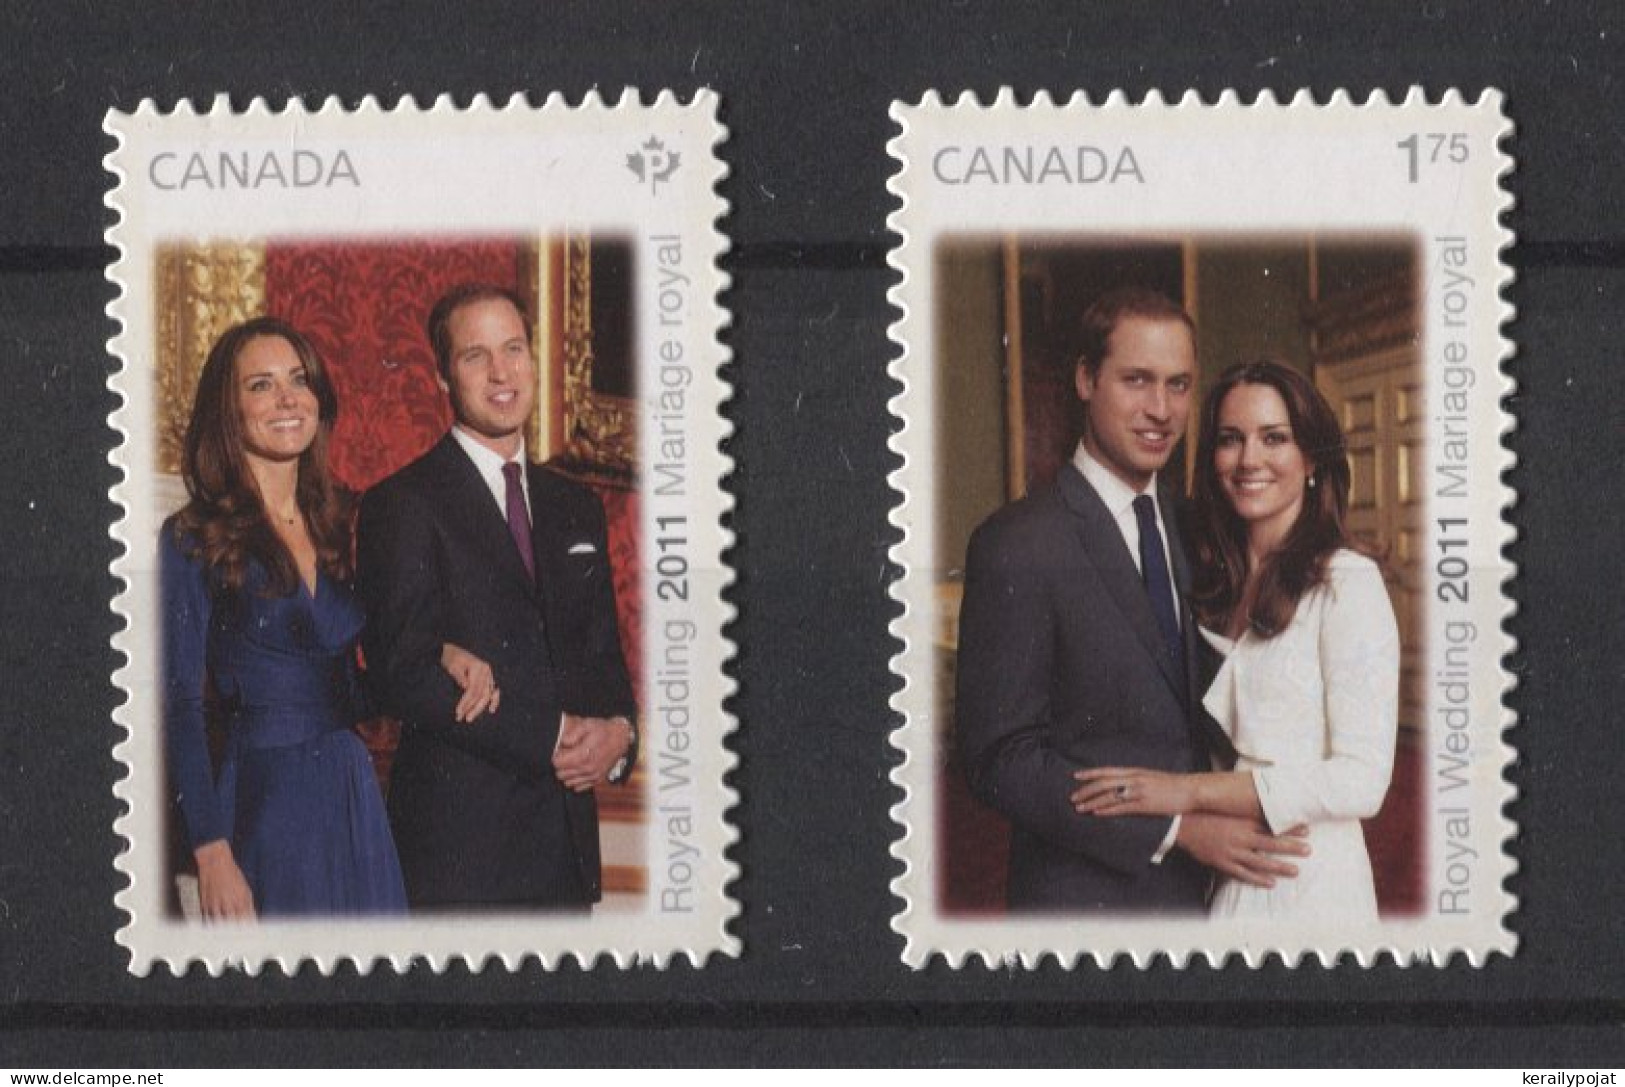 Canada - 2011 Prince William And Catherine Middleton Self-adhesive MNH__(TH-24855) - Ungebraucht